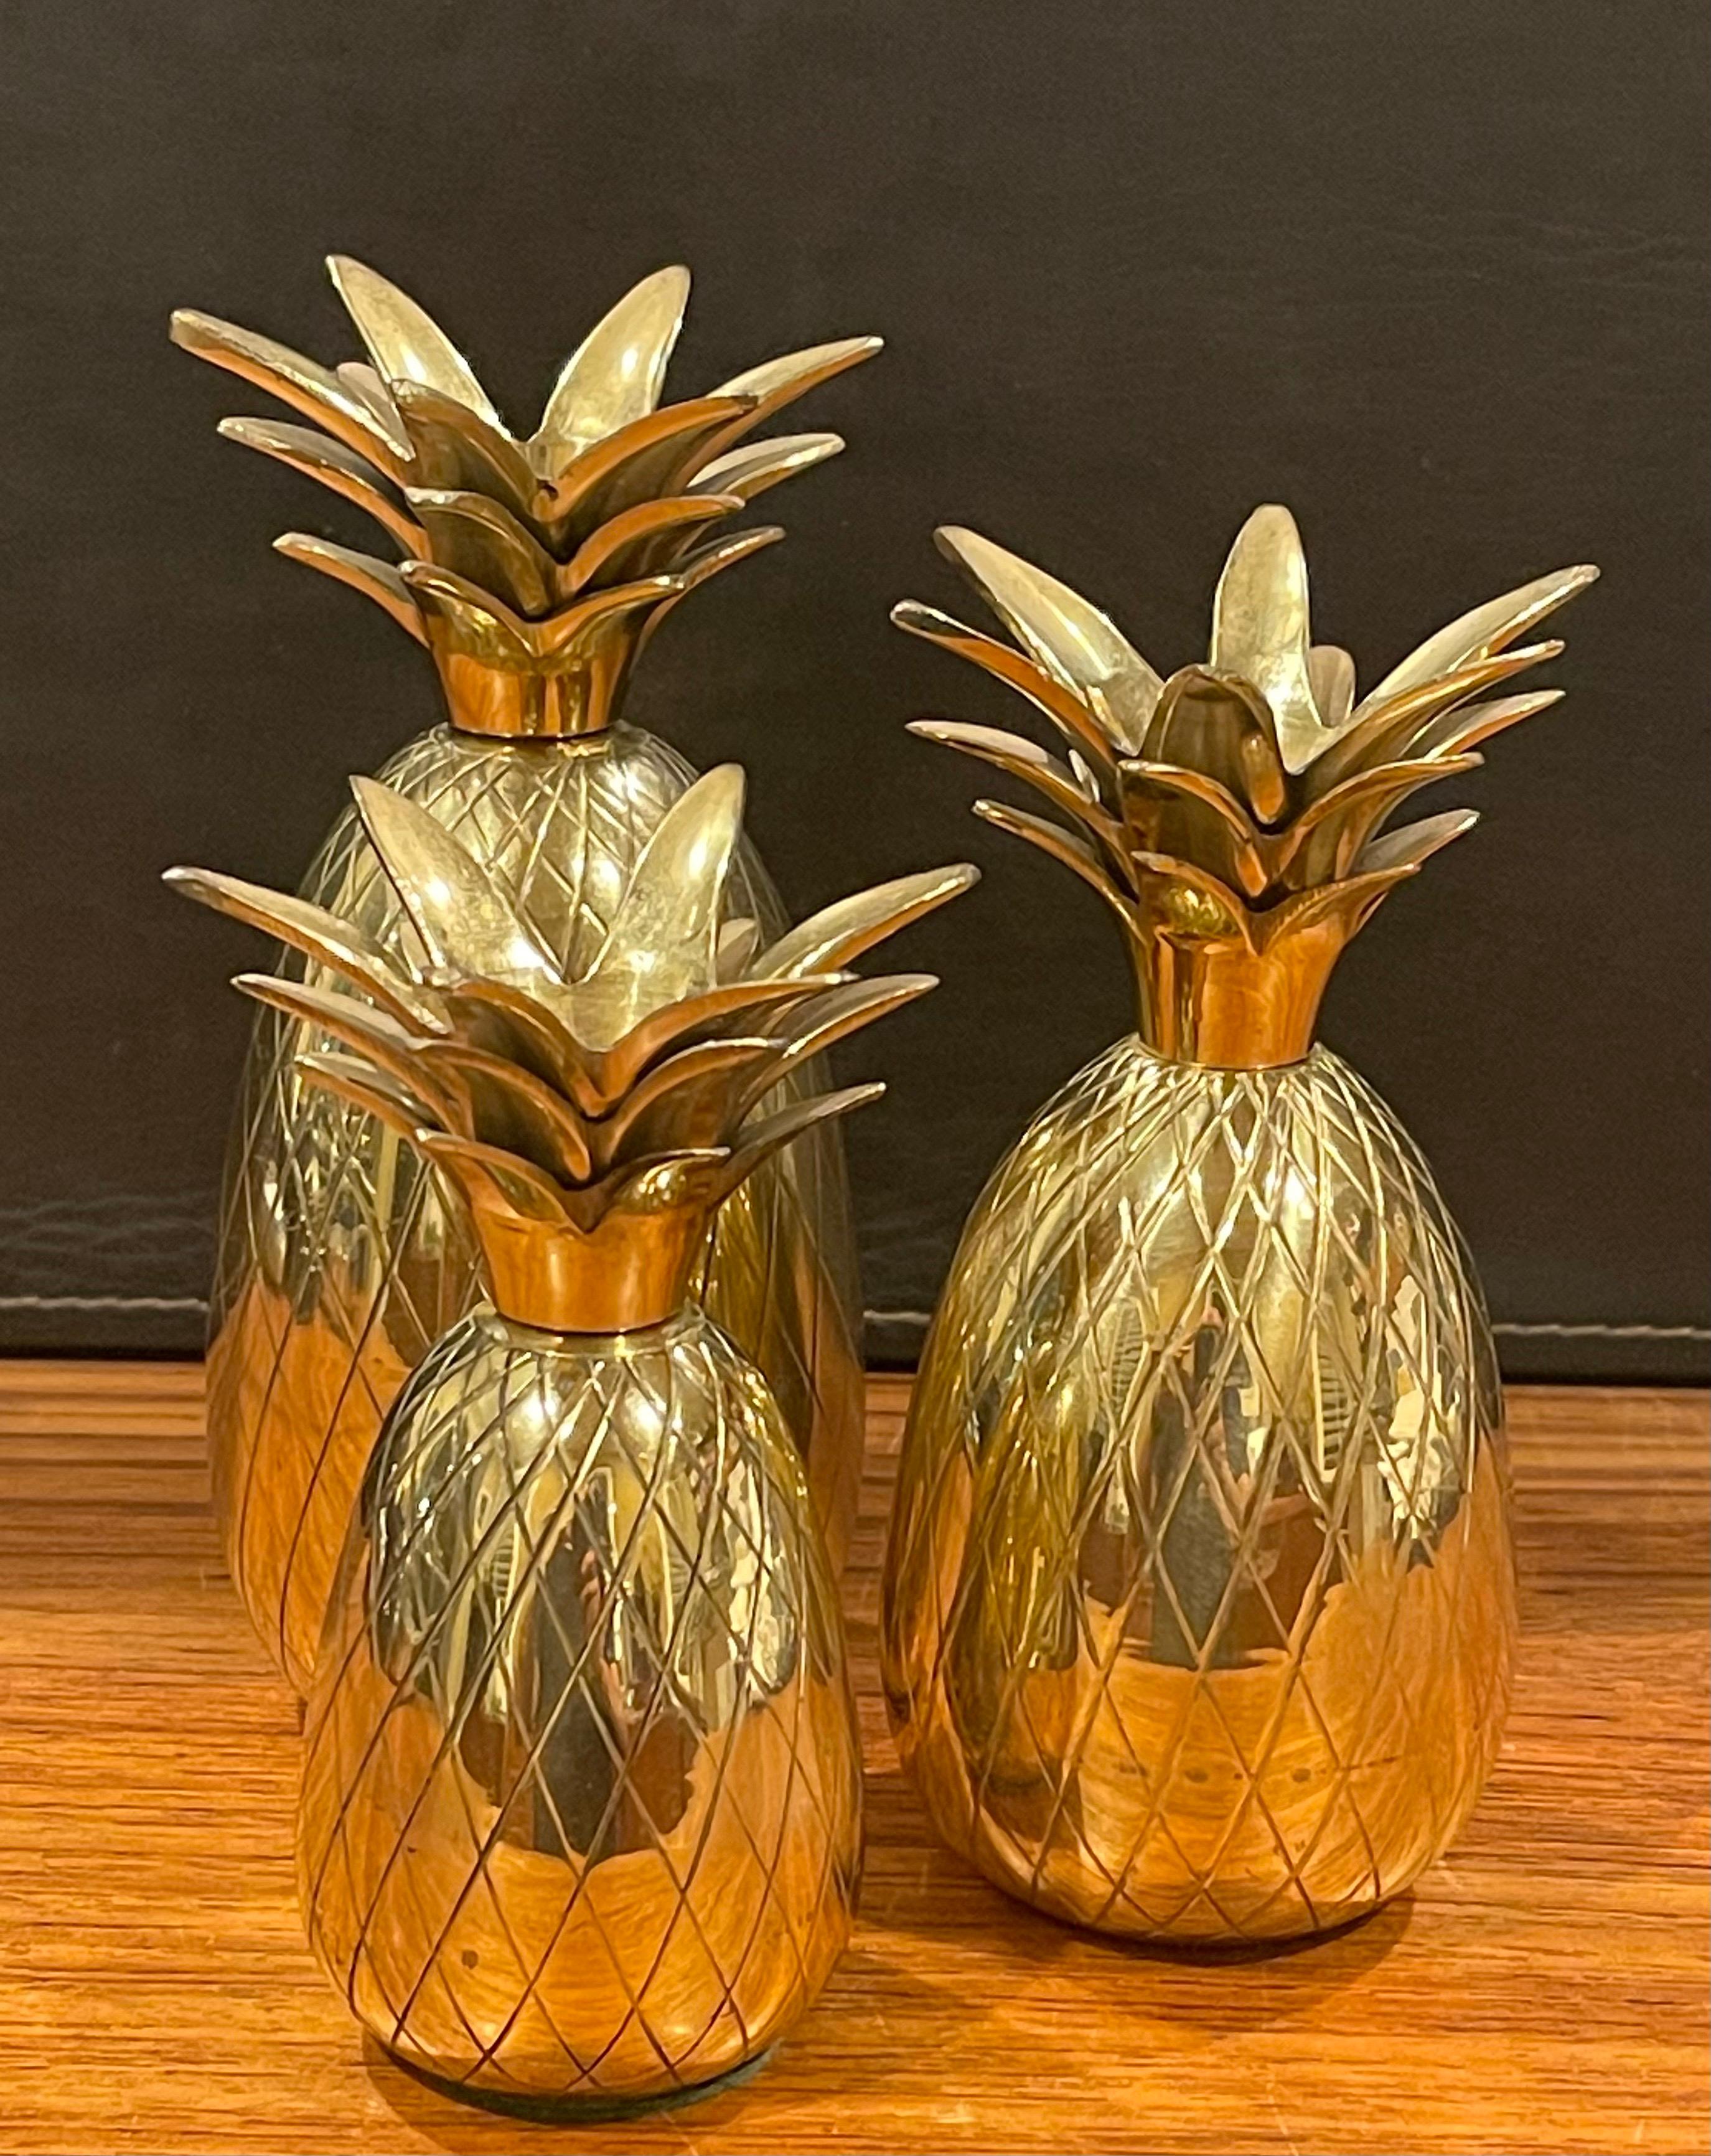 A very nice set of three hollywood regency brass pineapple candle holders, circa 1970s. The set is in very good vintage condition with a wonderful patina; the candles largest candle measures 3.5